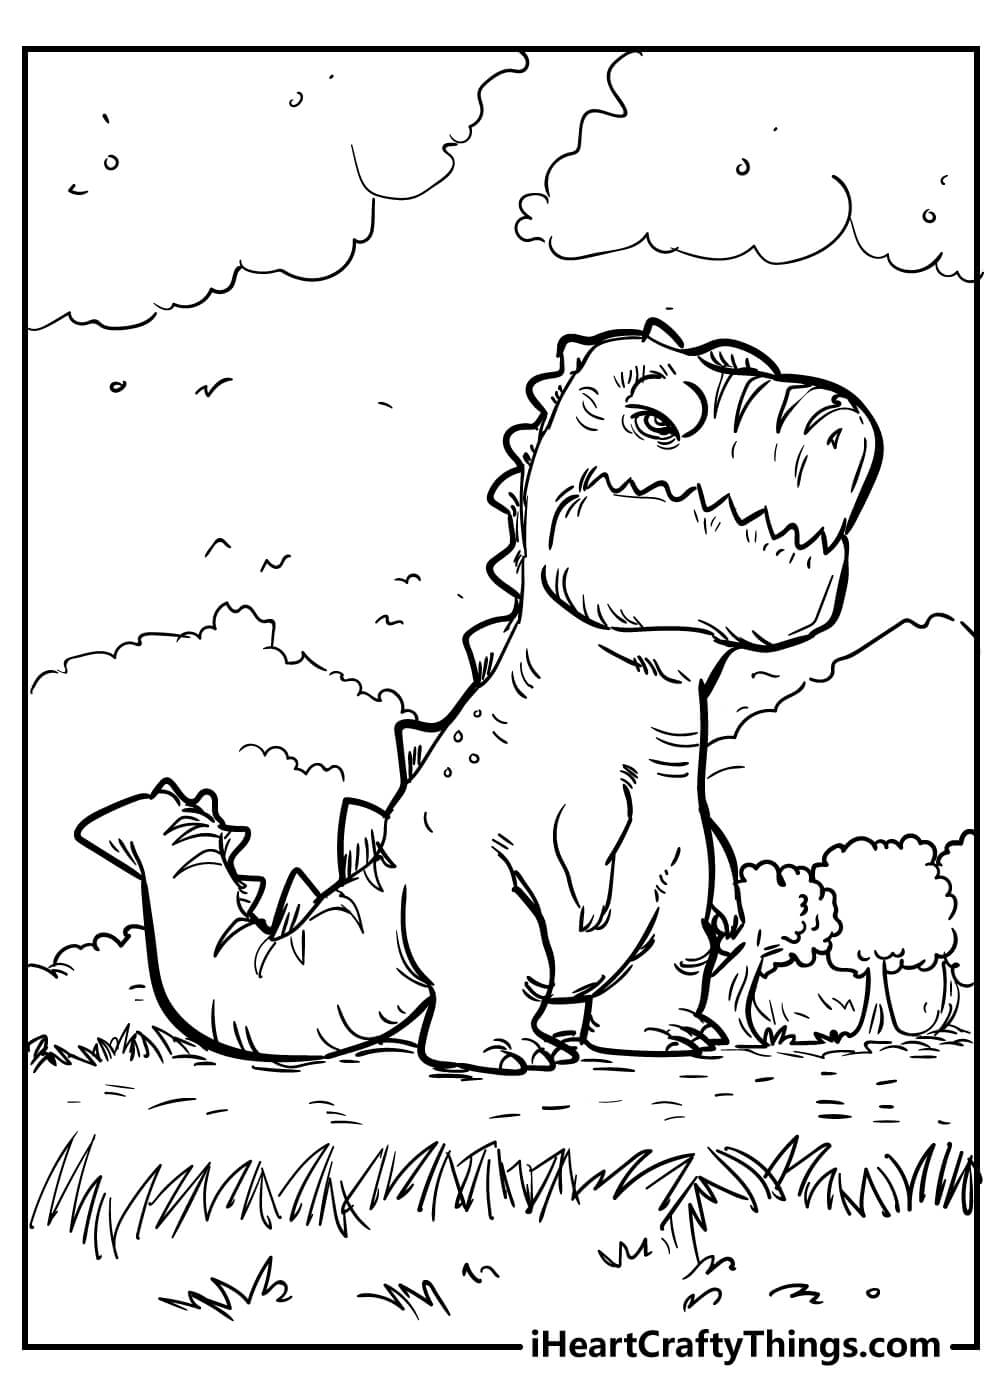 spinosaurus vs t-rex coloring pages | big t rex coloring page | indominus rex vs t rex coloring pages